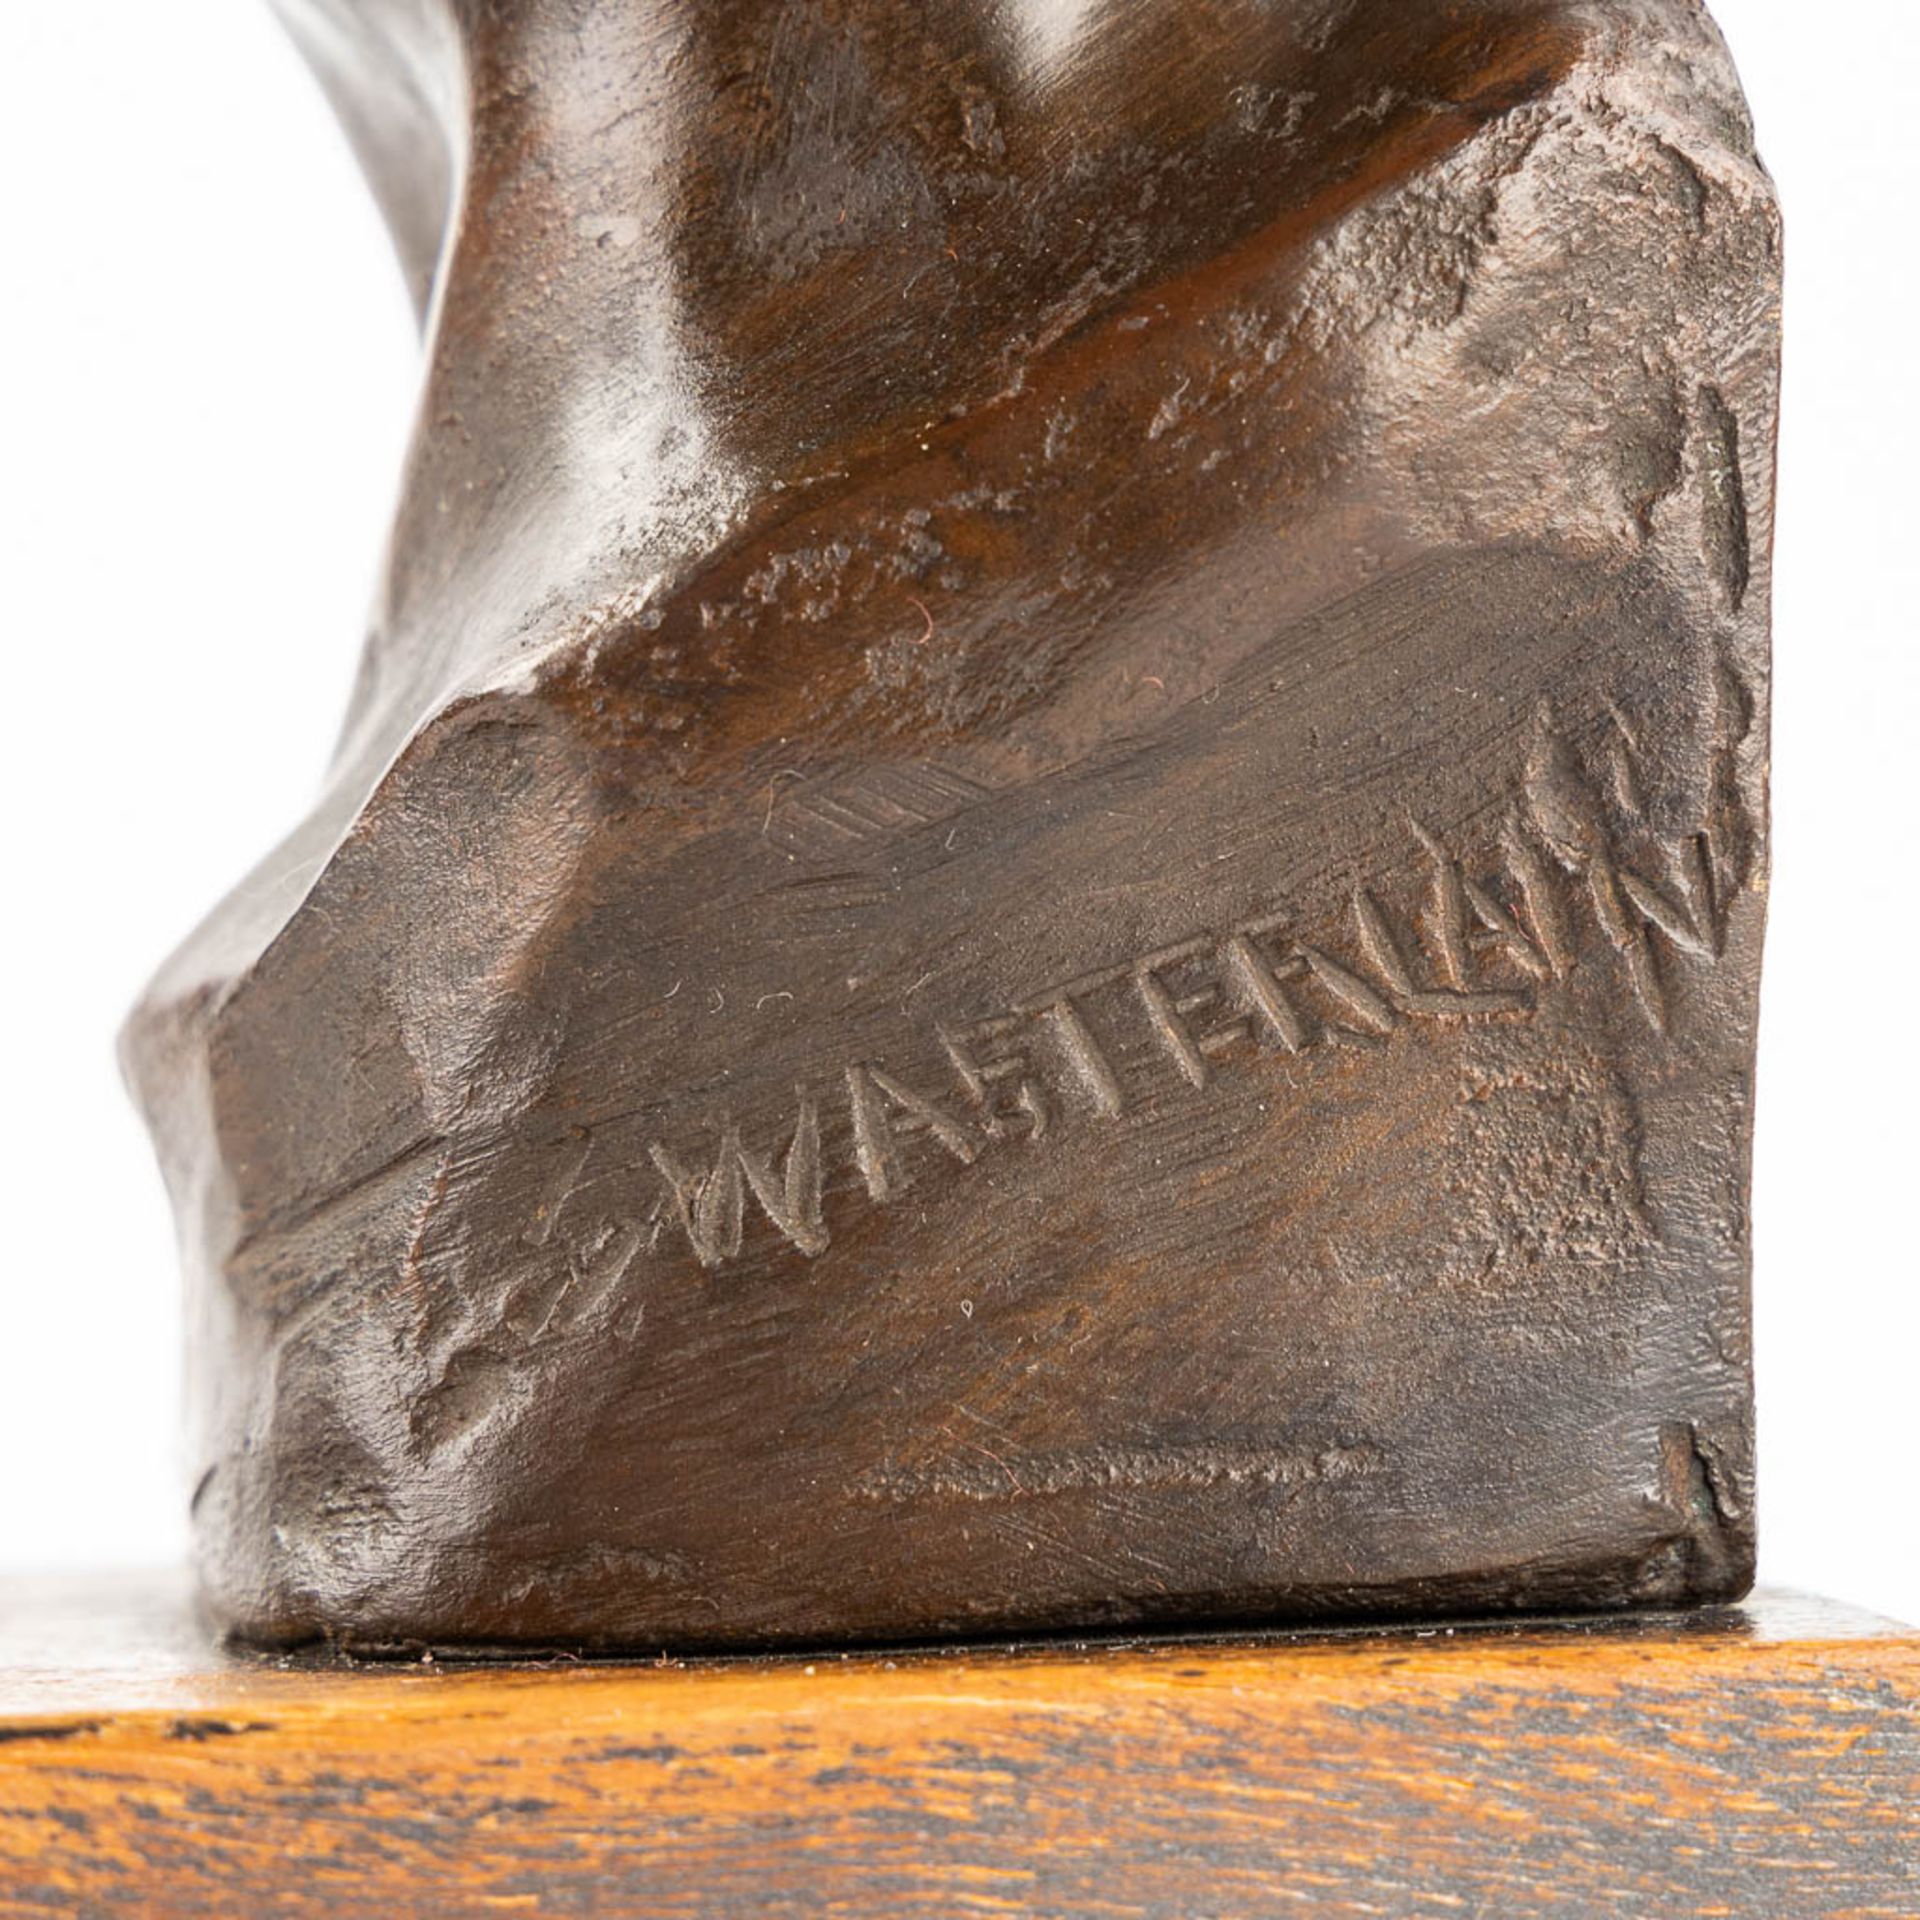 Georges WASTERLAIN (1889-1963) 'Mineur' patinated bronze. (L:11 x W:13 x H:26,5 cm) - Image 10 of 11